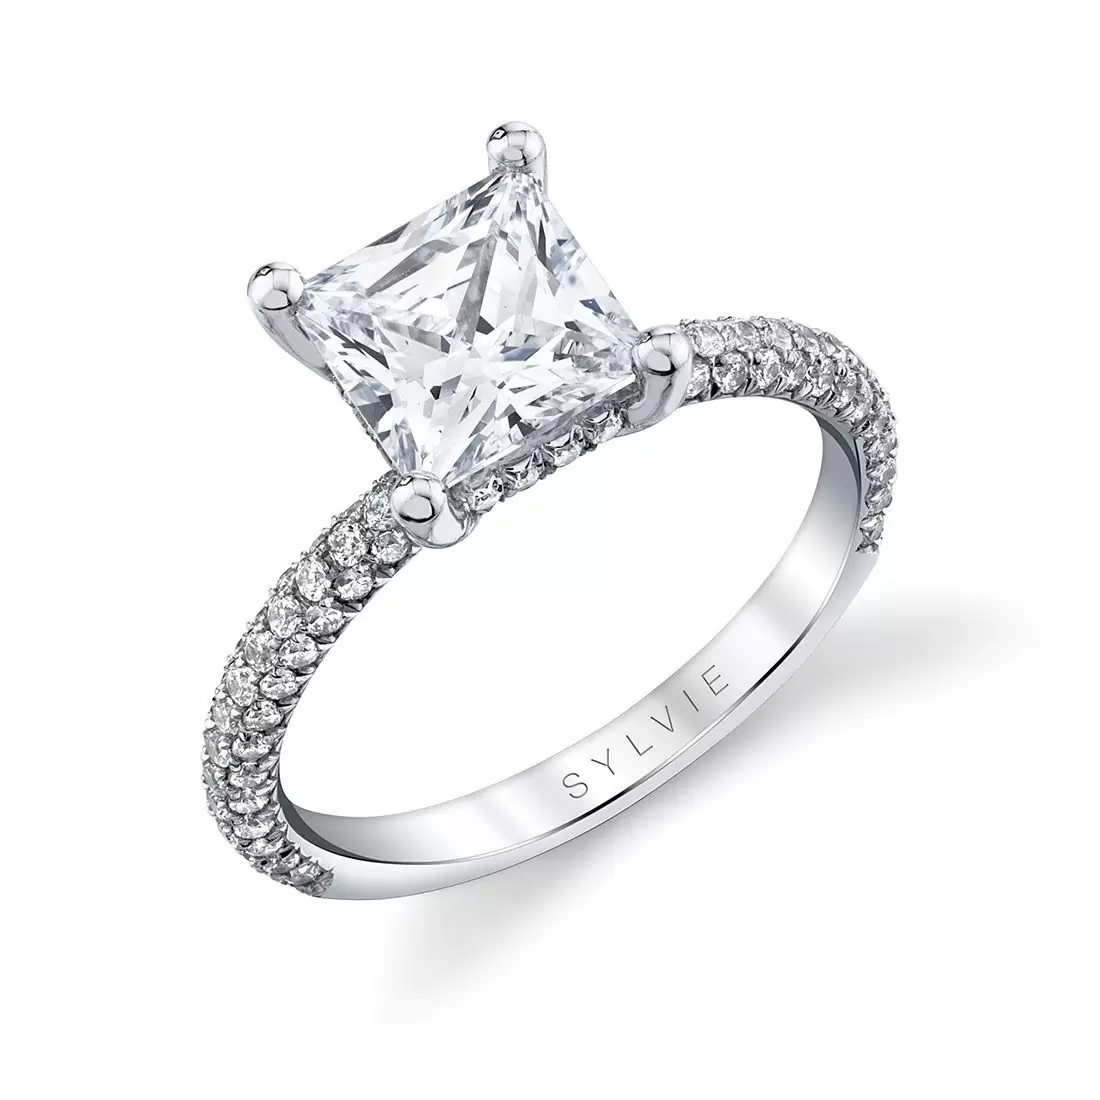 A Guide to 2 Carat Diamond Engagement Rings - Sylvie Jewelry